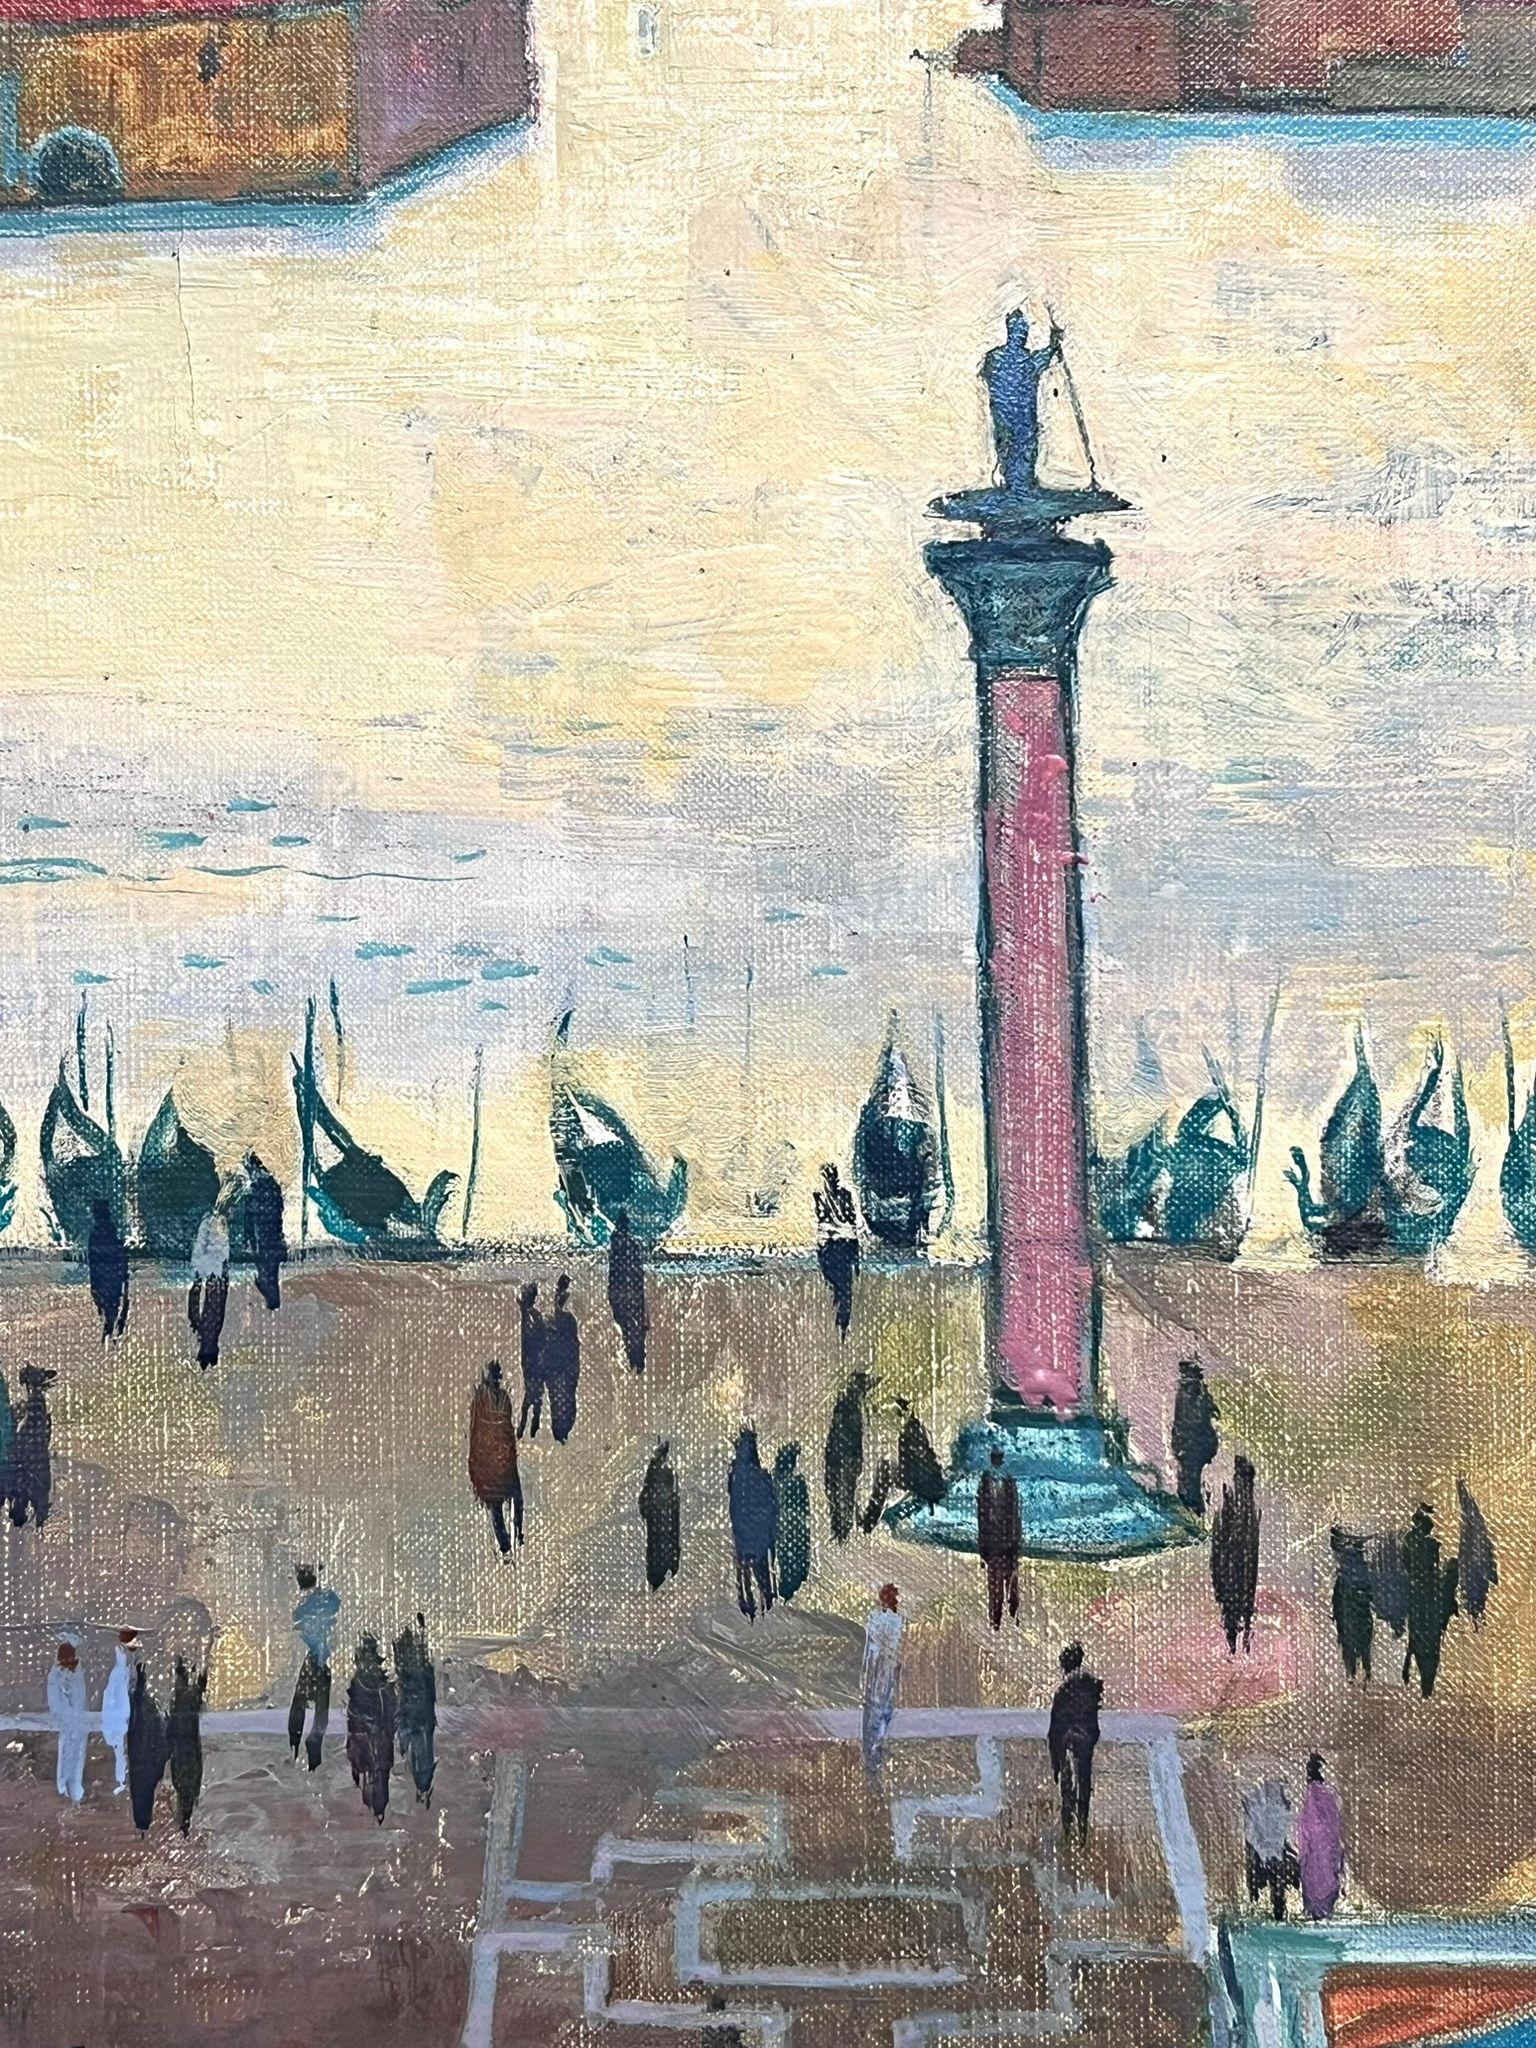 Piazza San Marco, Venice
by Maurice Delavier (French 1902-1986)
signed oil on canvas, unframed
dated 58'
canvas: 21.5 x 25.5 inches
provenance: private collection, France, with exhibition label verso
condition: overall very good and sound condition 